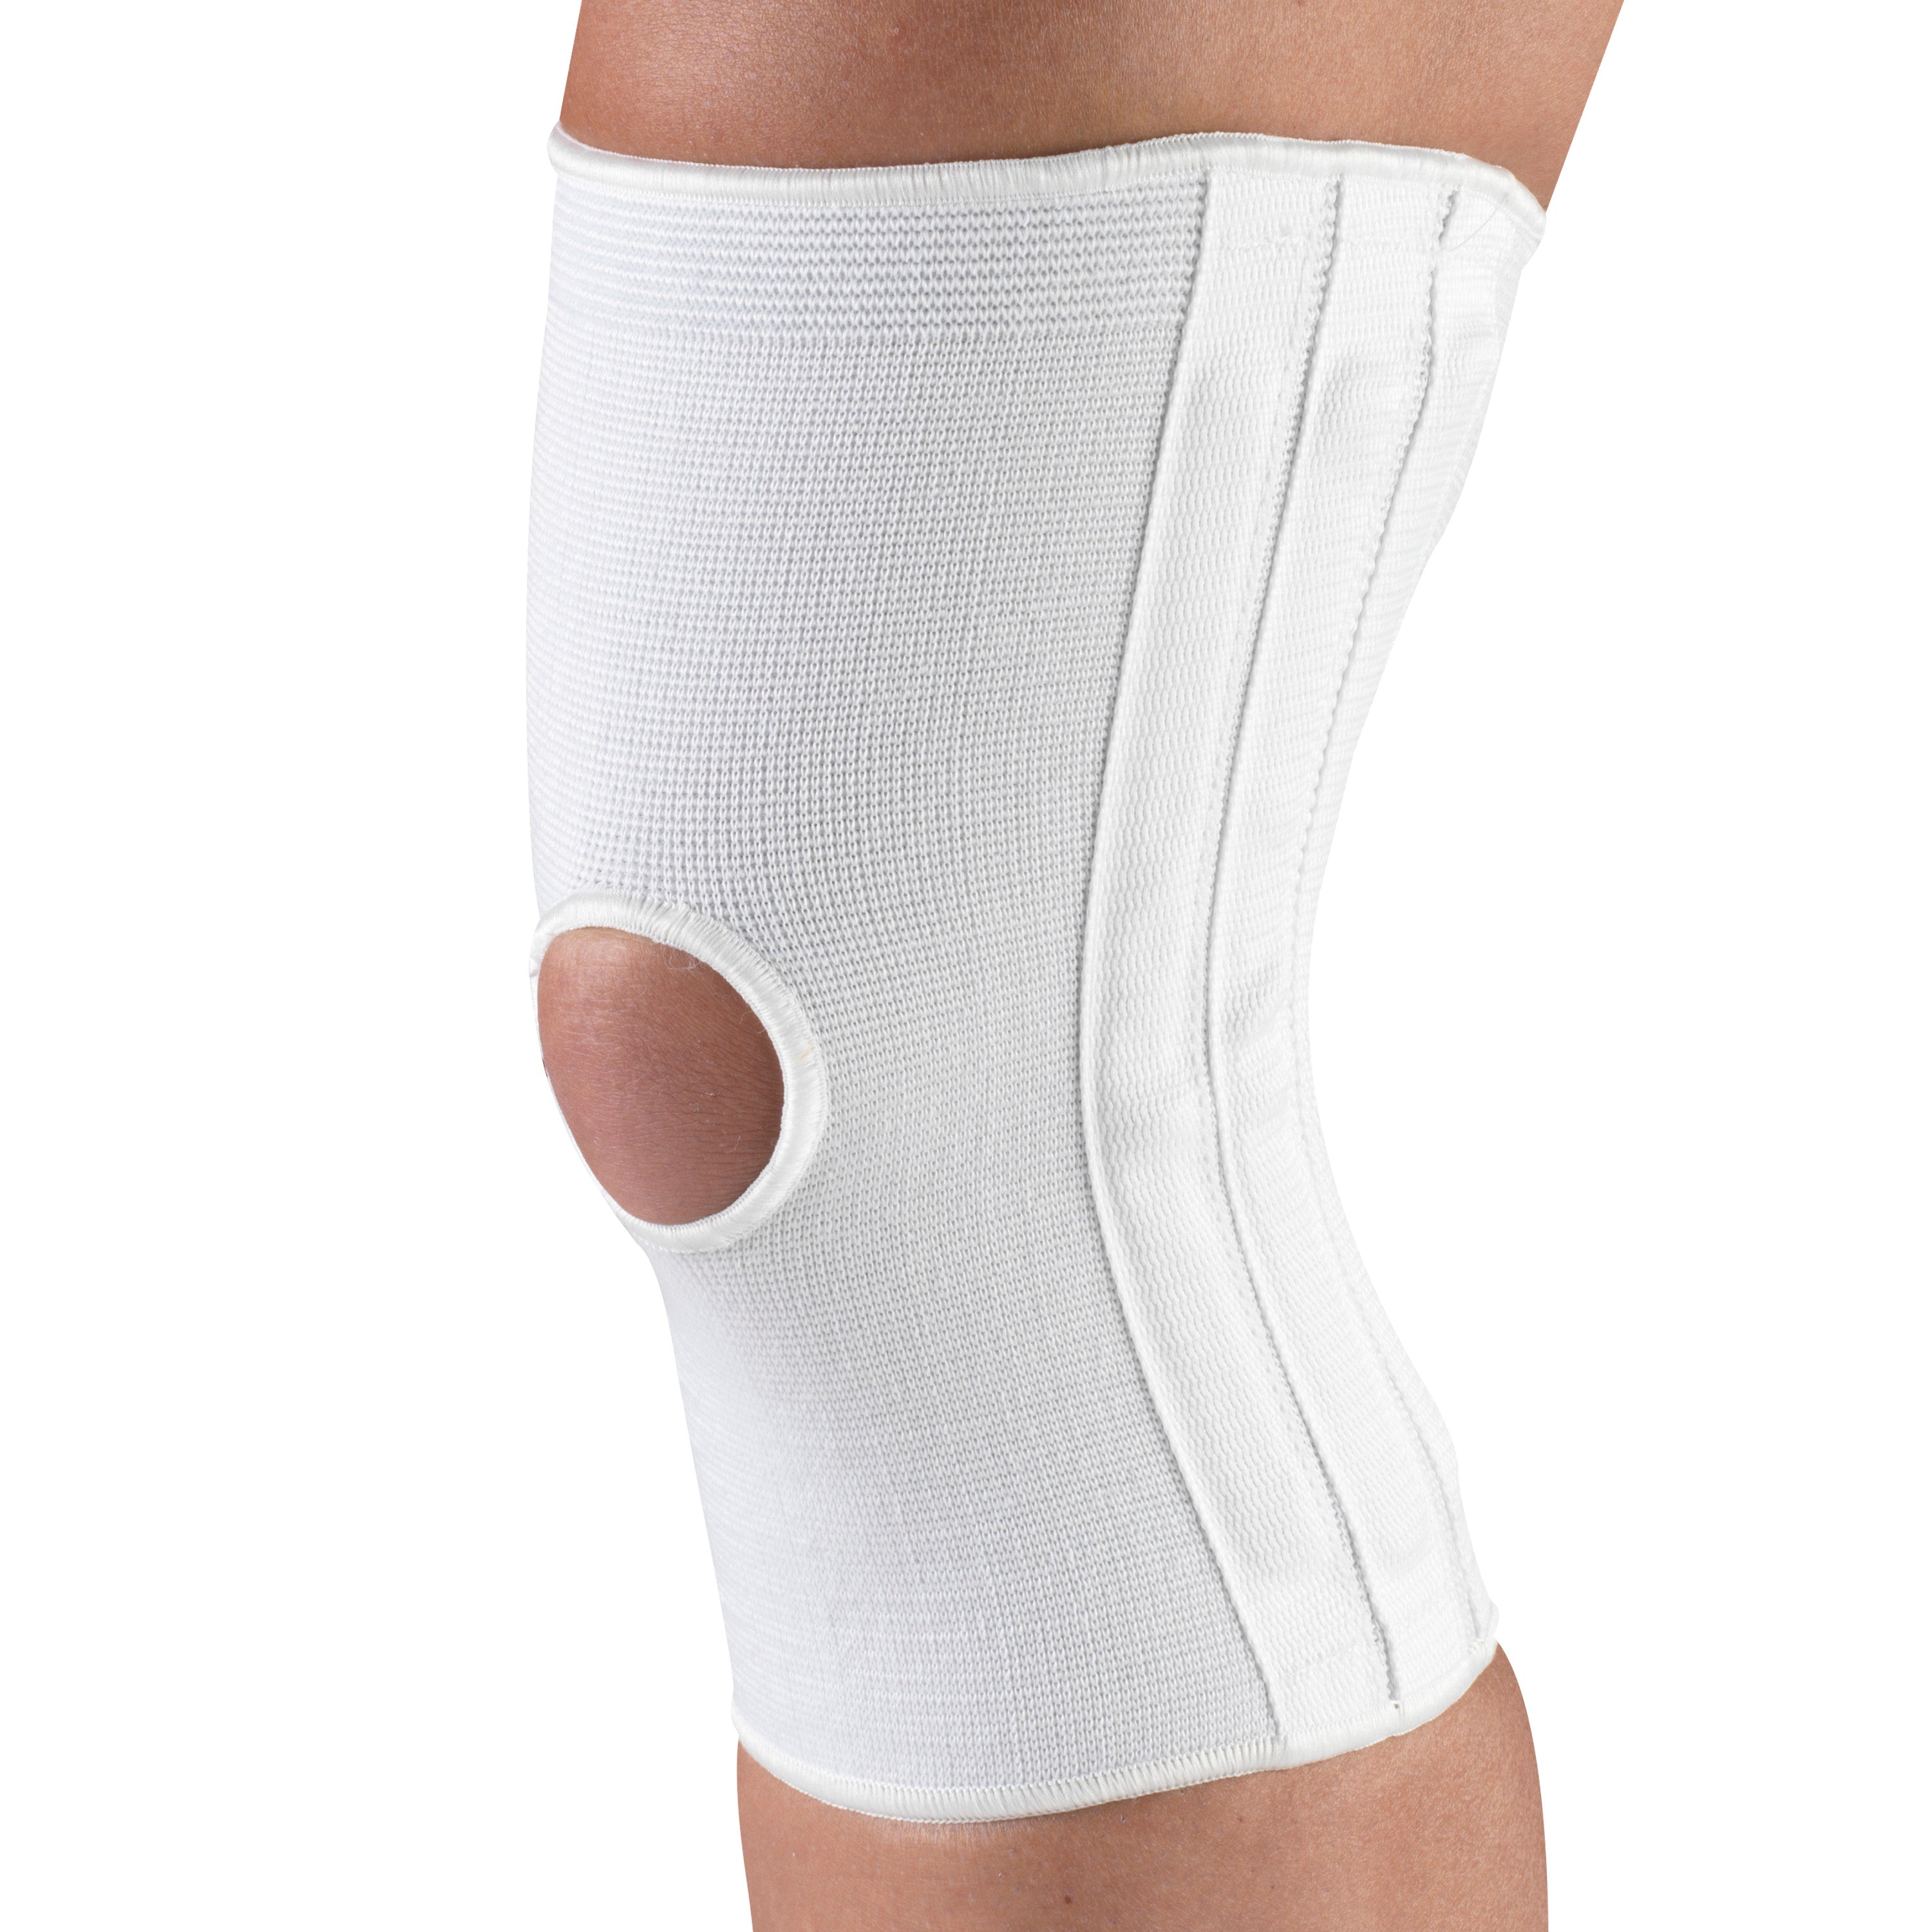 Champion Medium Knee Brace W/ Hor-Shu Support Pad White X-Large (19 - 21 3/4") Controlled Stretch Elastic - Ea/1 - Home Health Store Inc